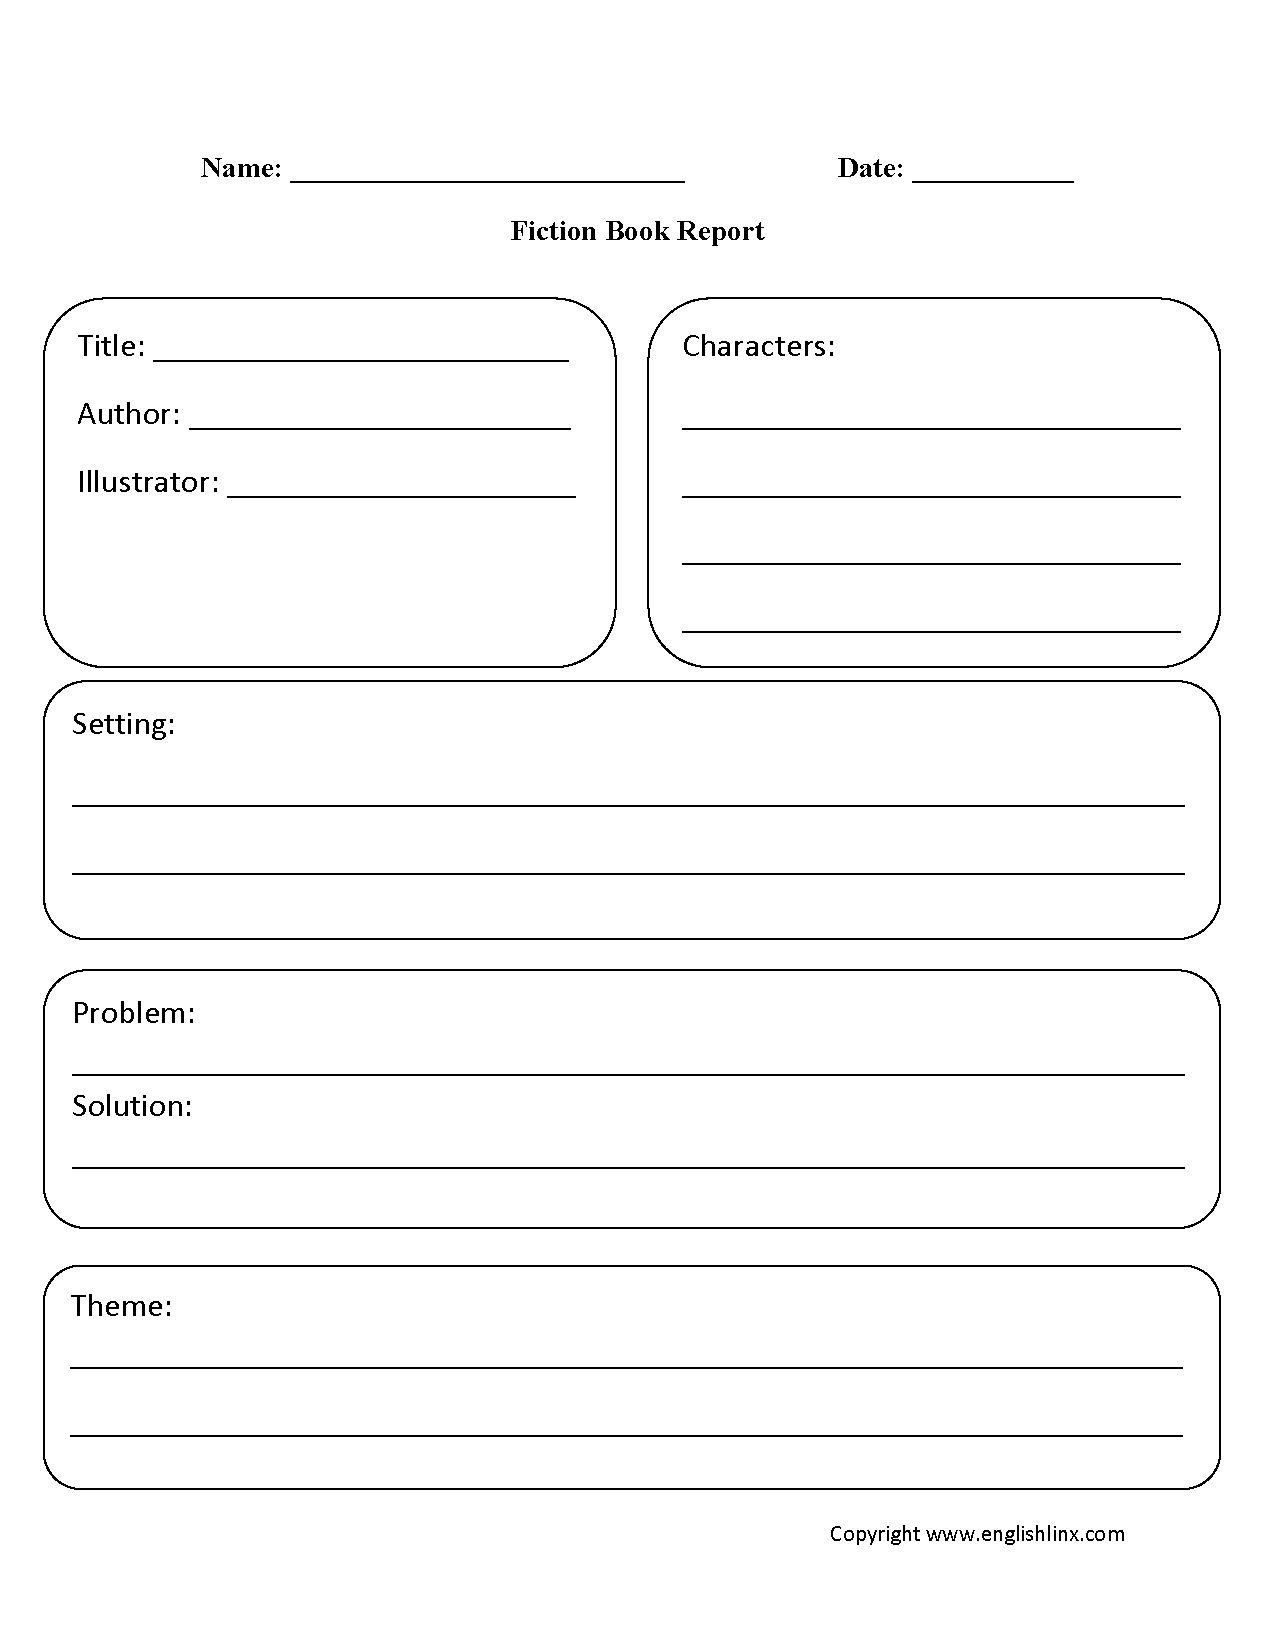 how to write a book report in 4th grade